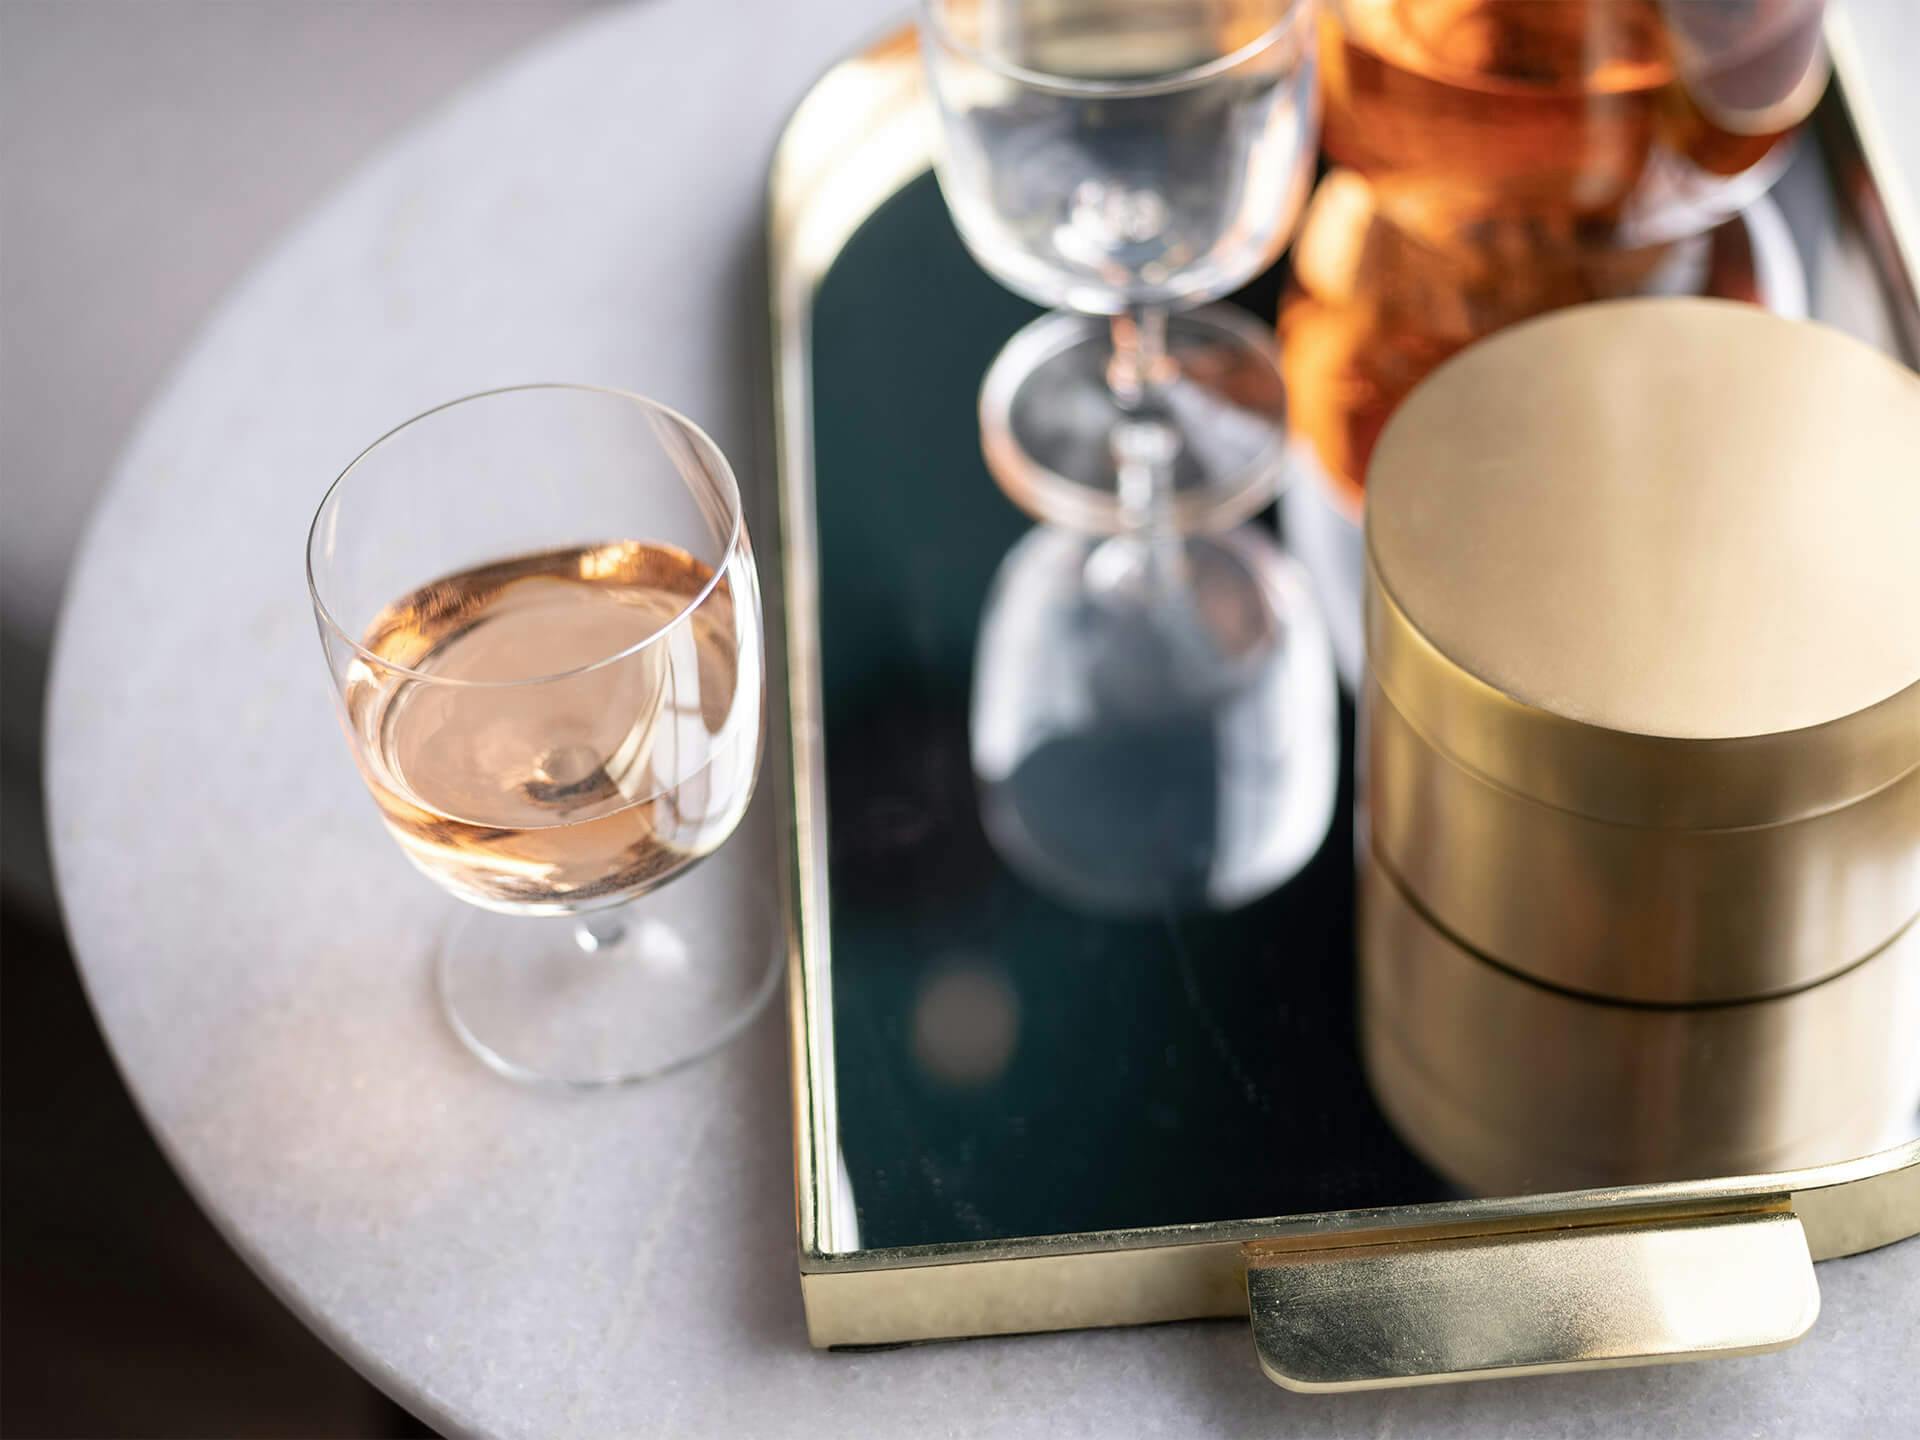 Glassware on gold table tray.